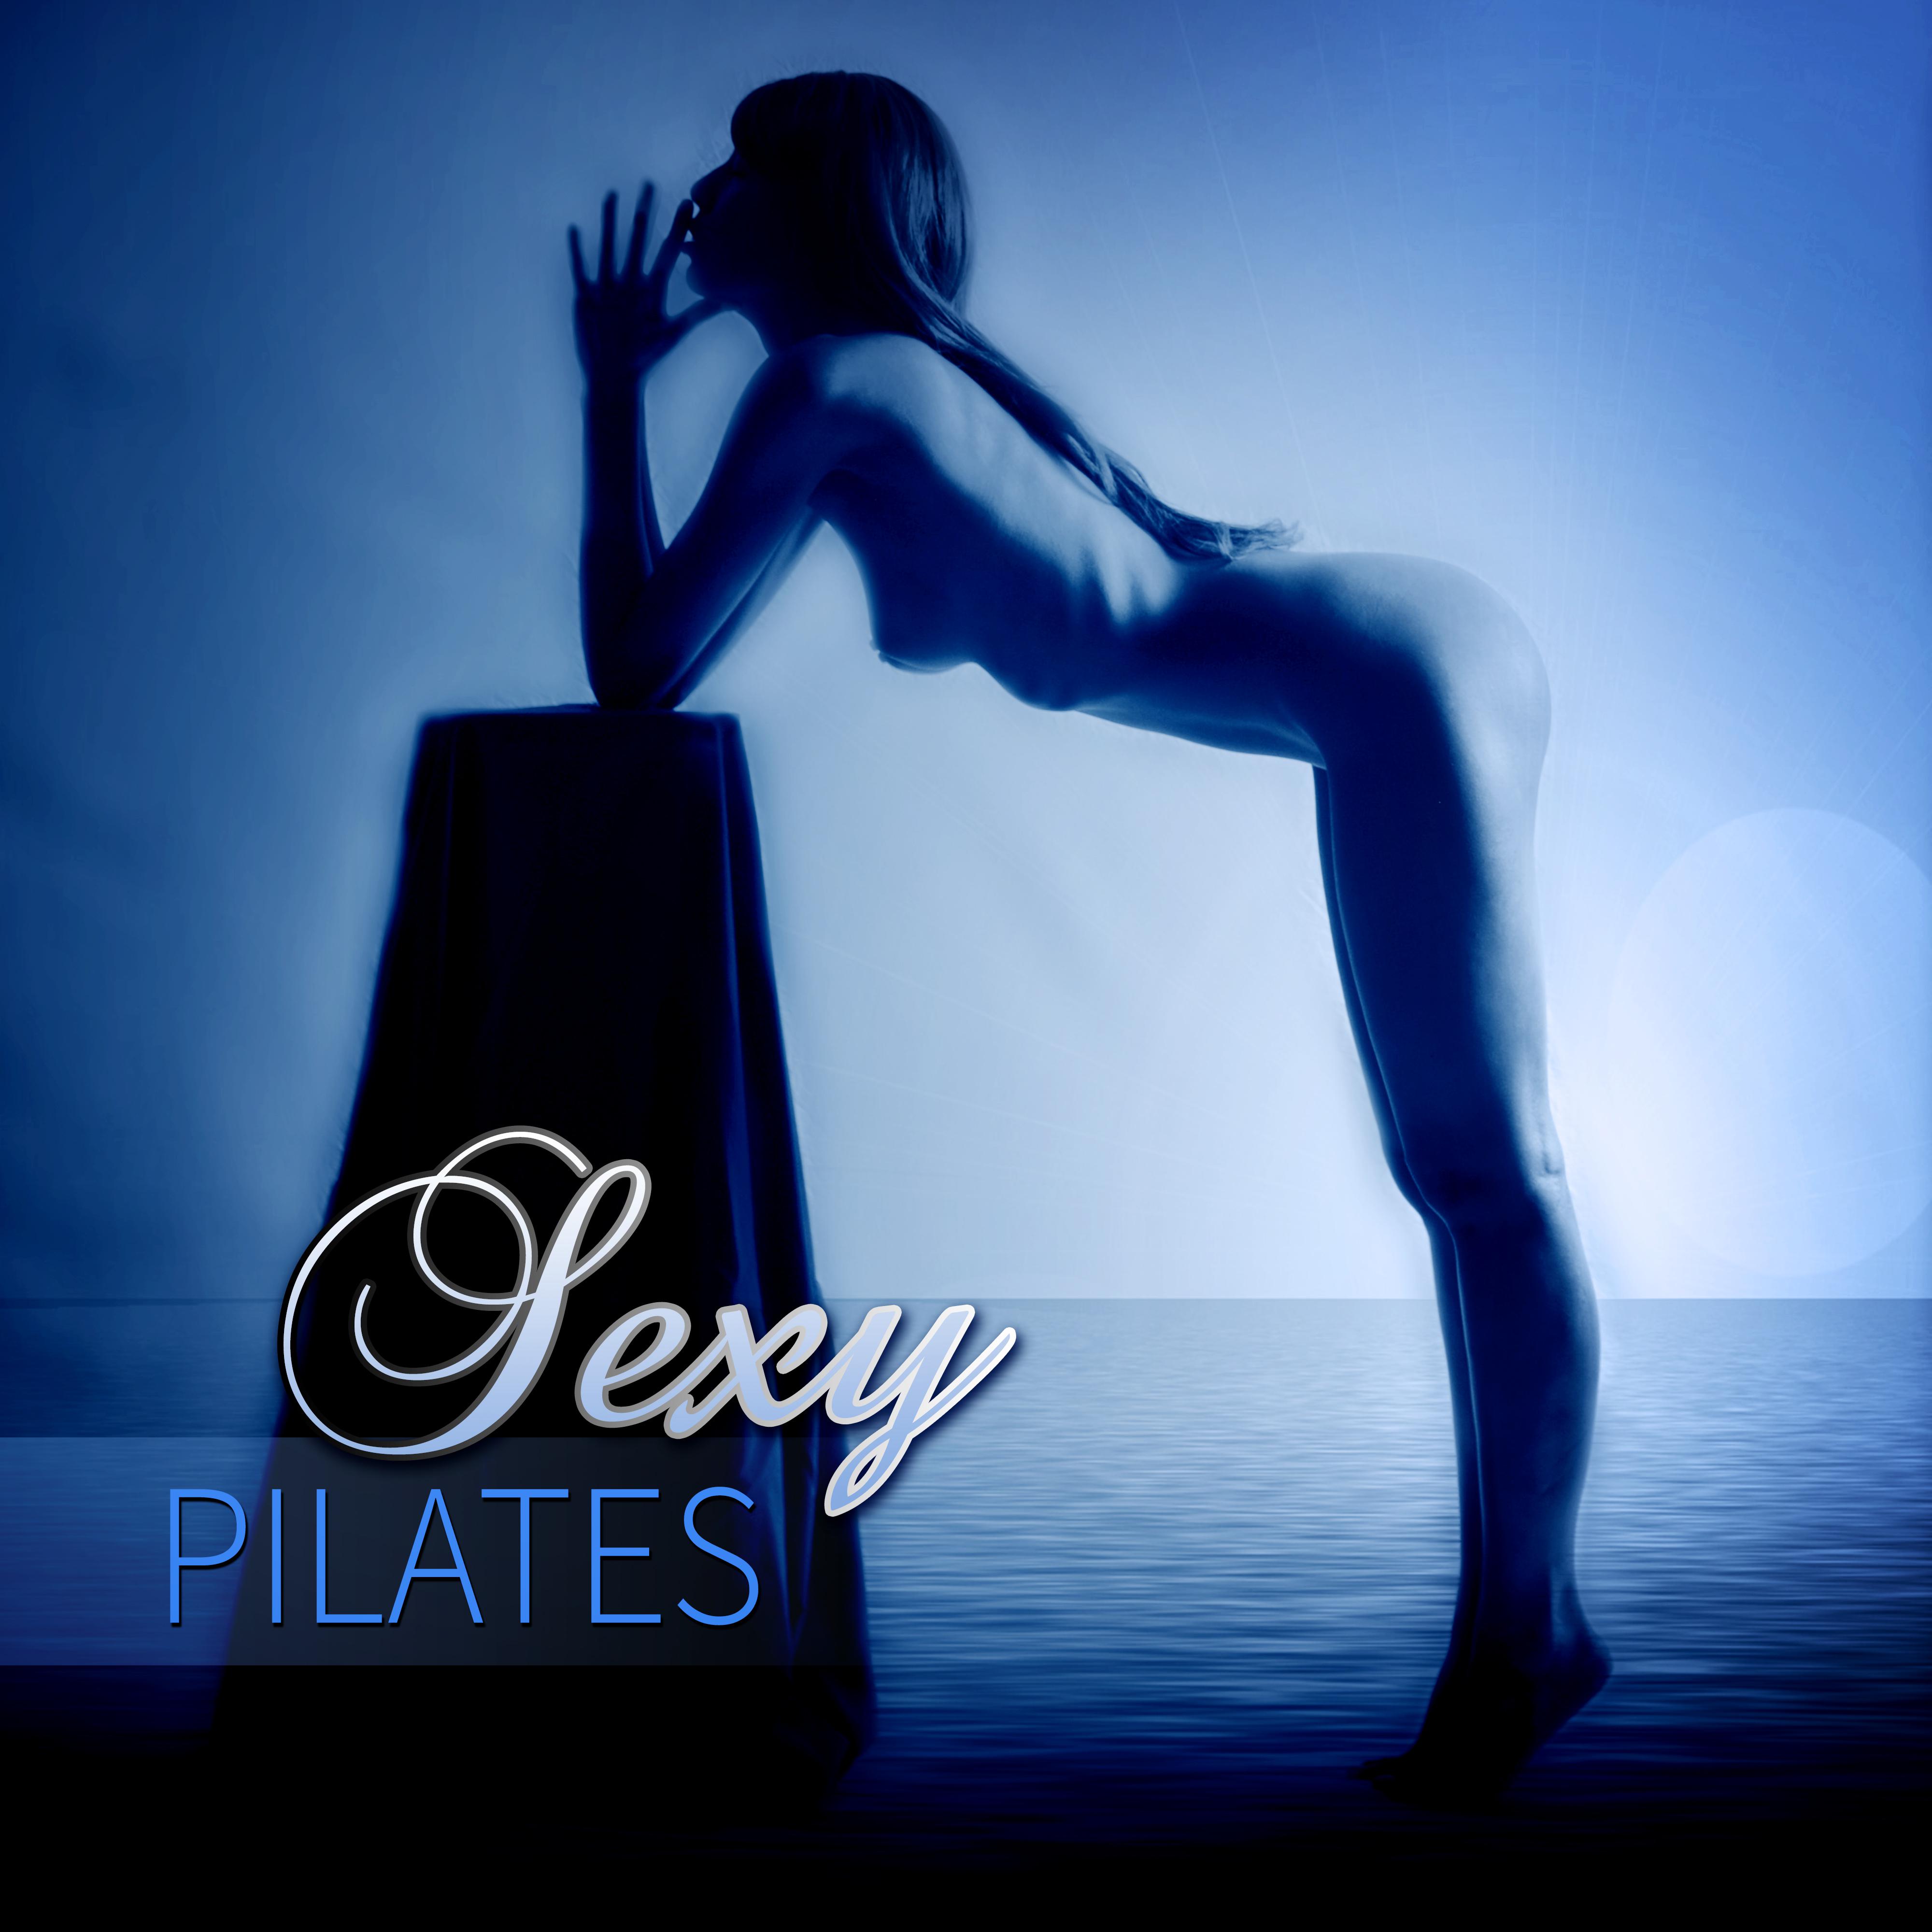 **** Pilates – Oriental Lounge Chill Music for Dynamic and **** Yoga, Stretching & Woman Fitness, Active Workout Music